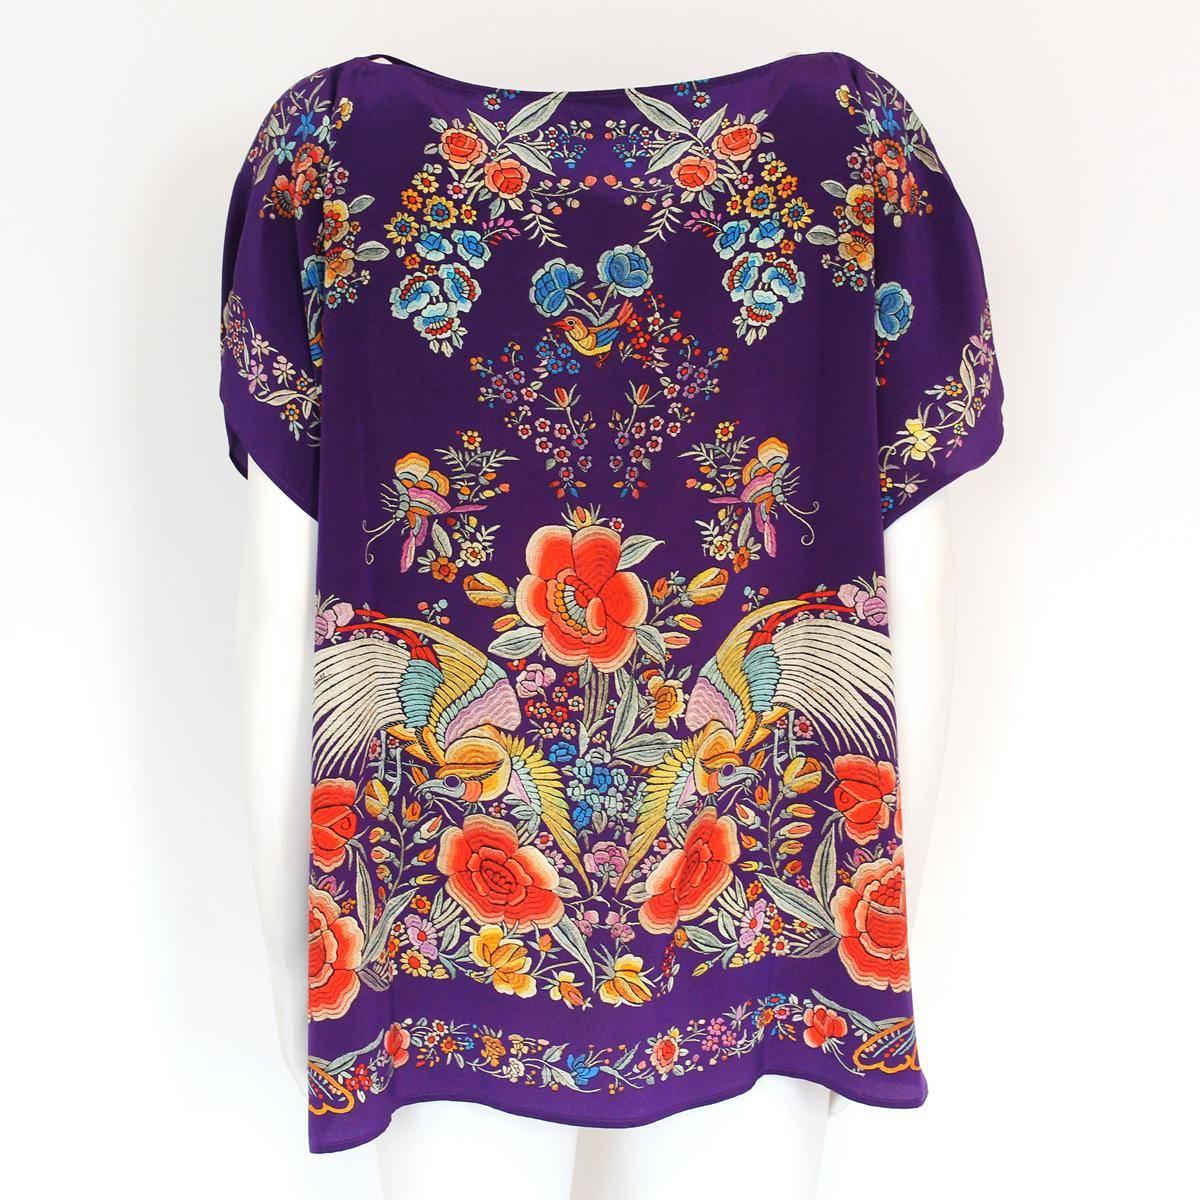 Masterpiece by Roberto Cavalli
Amazing mulitcolored print, typical Cavalli style
Silk
Multicolored floral print
Purple color
Lenght cm 65 (25.5 inches)
WORLDWIDE EXPRESS SHIPPING INCLUDED IN THE PRICE !